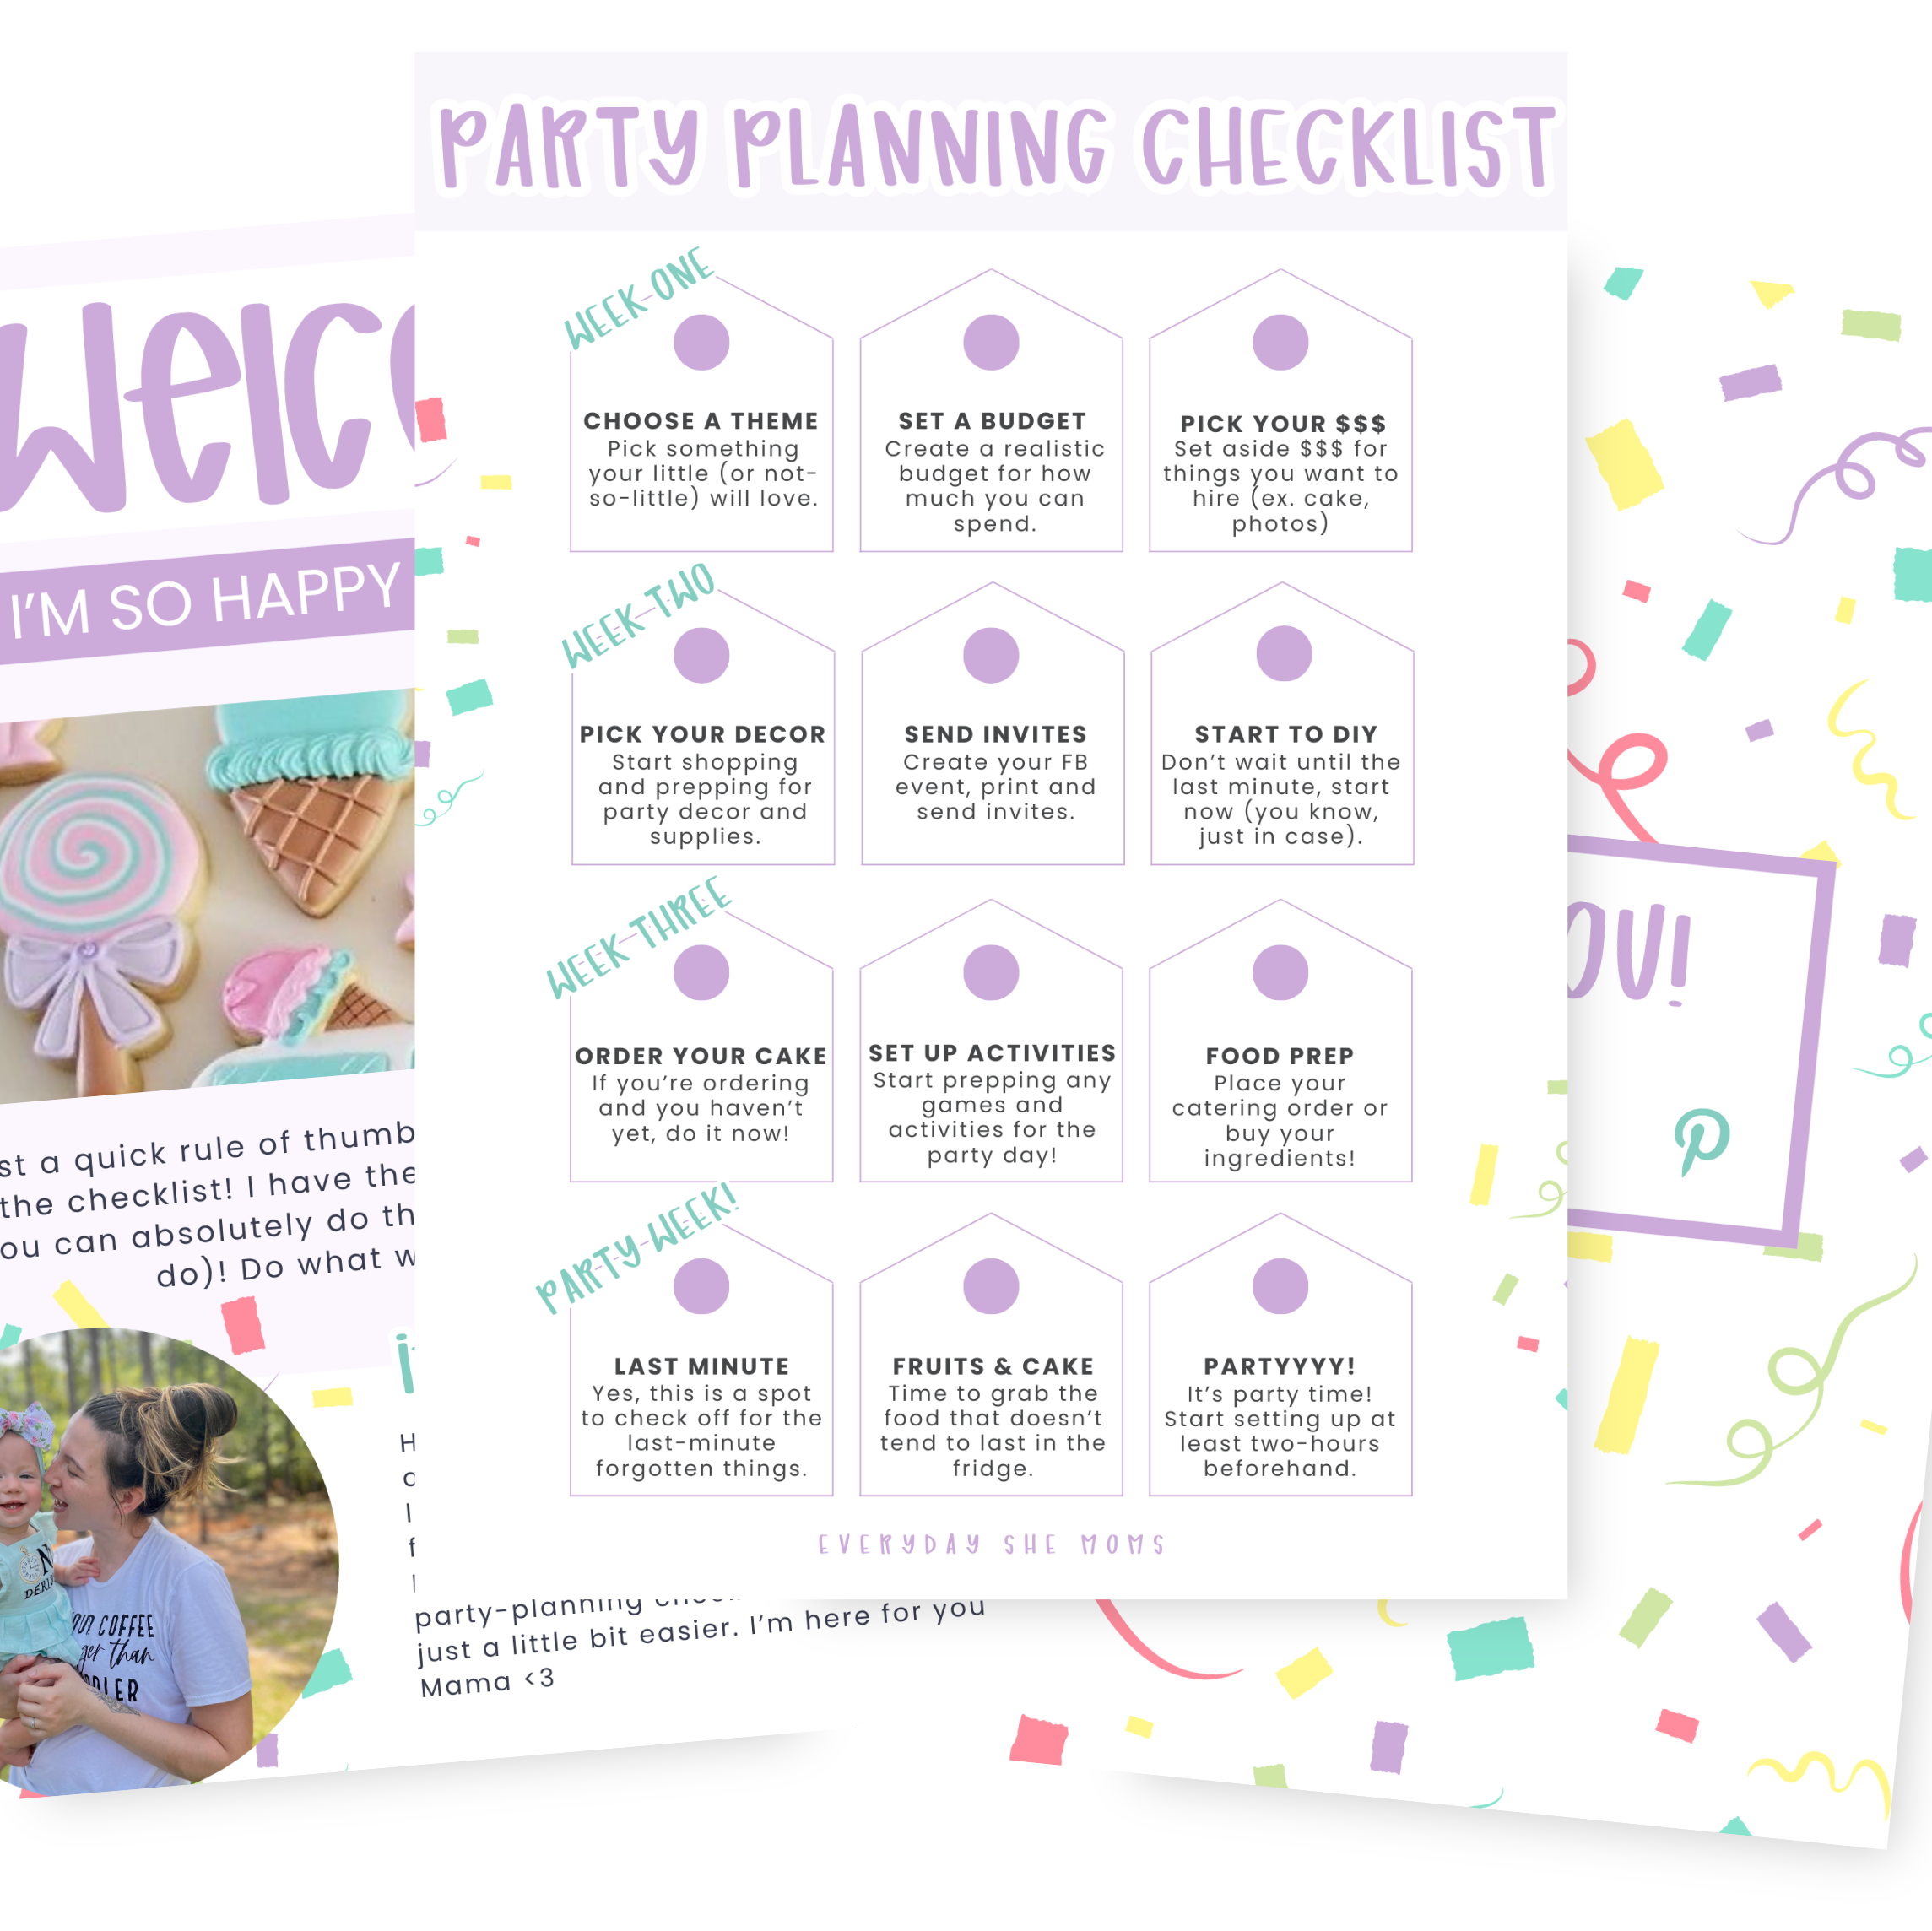 Birthday Party Planning Checklist for Moms | Everyday She Moms